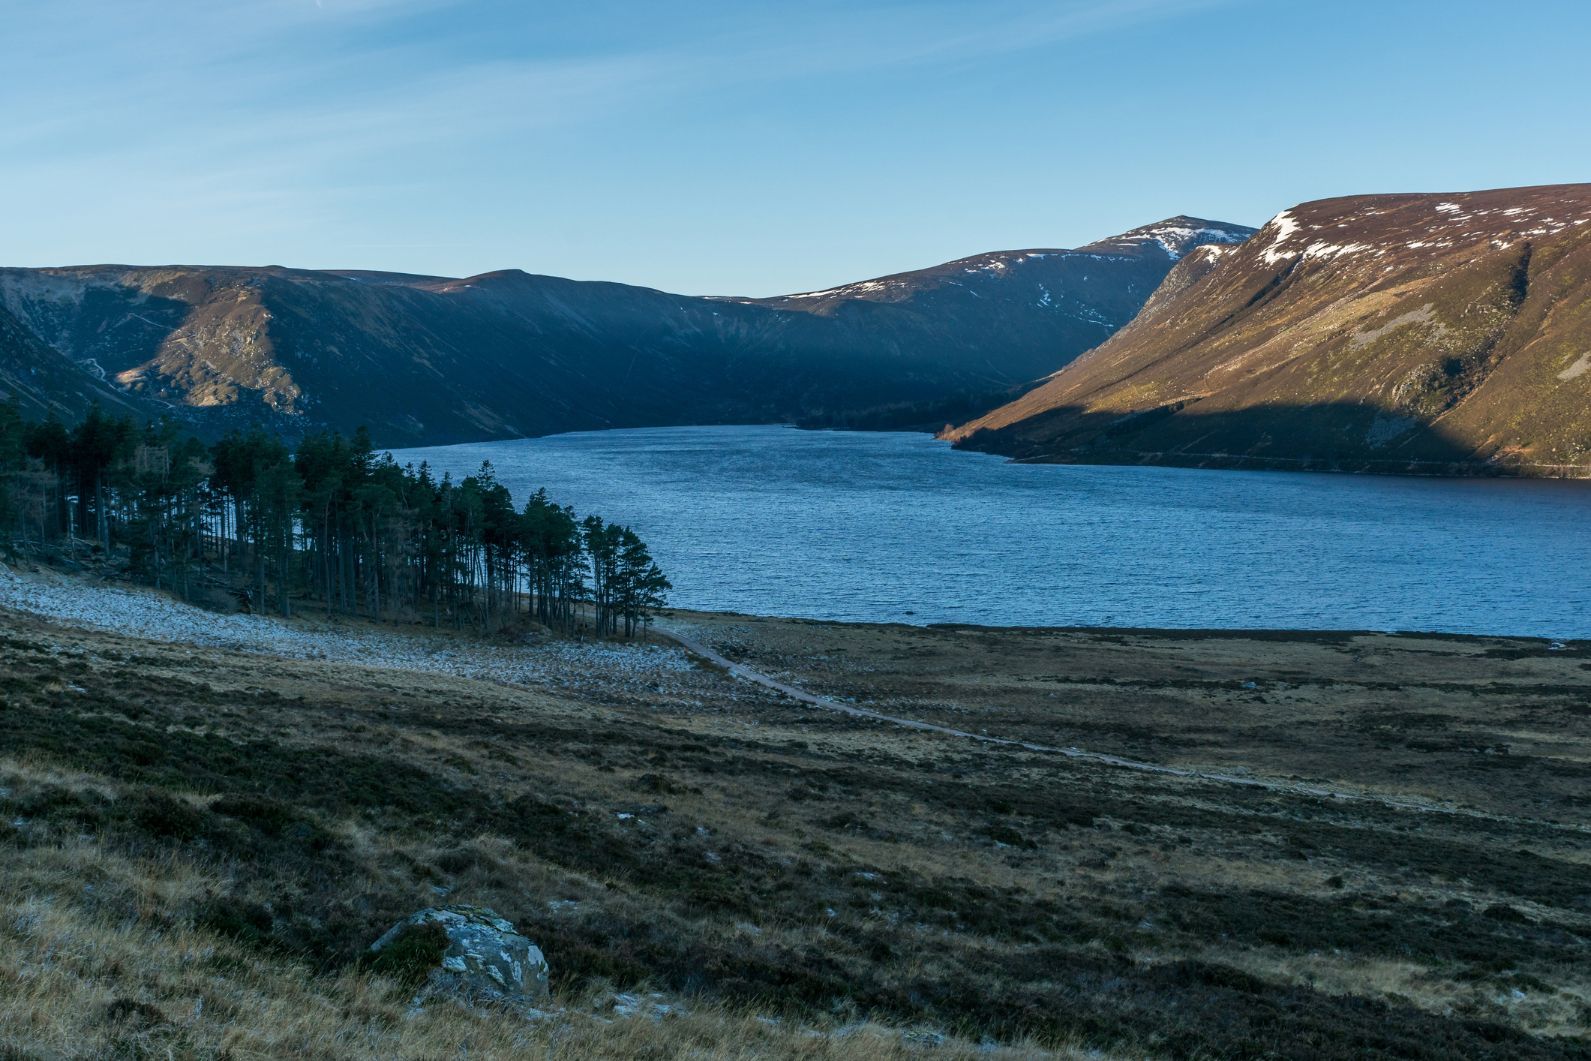 Looking down onto Loch Muick with the Broad Cairn in the background.